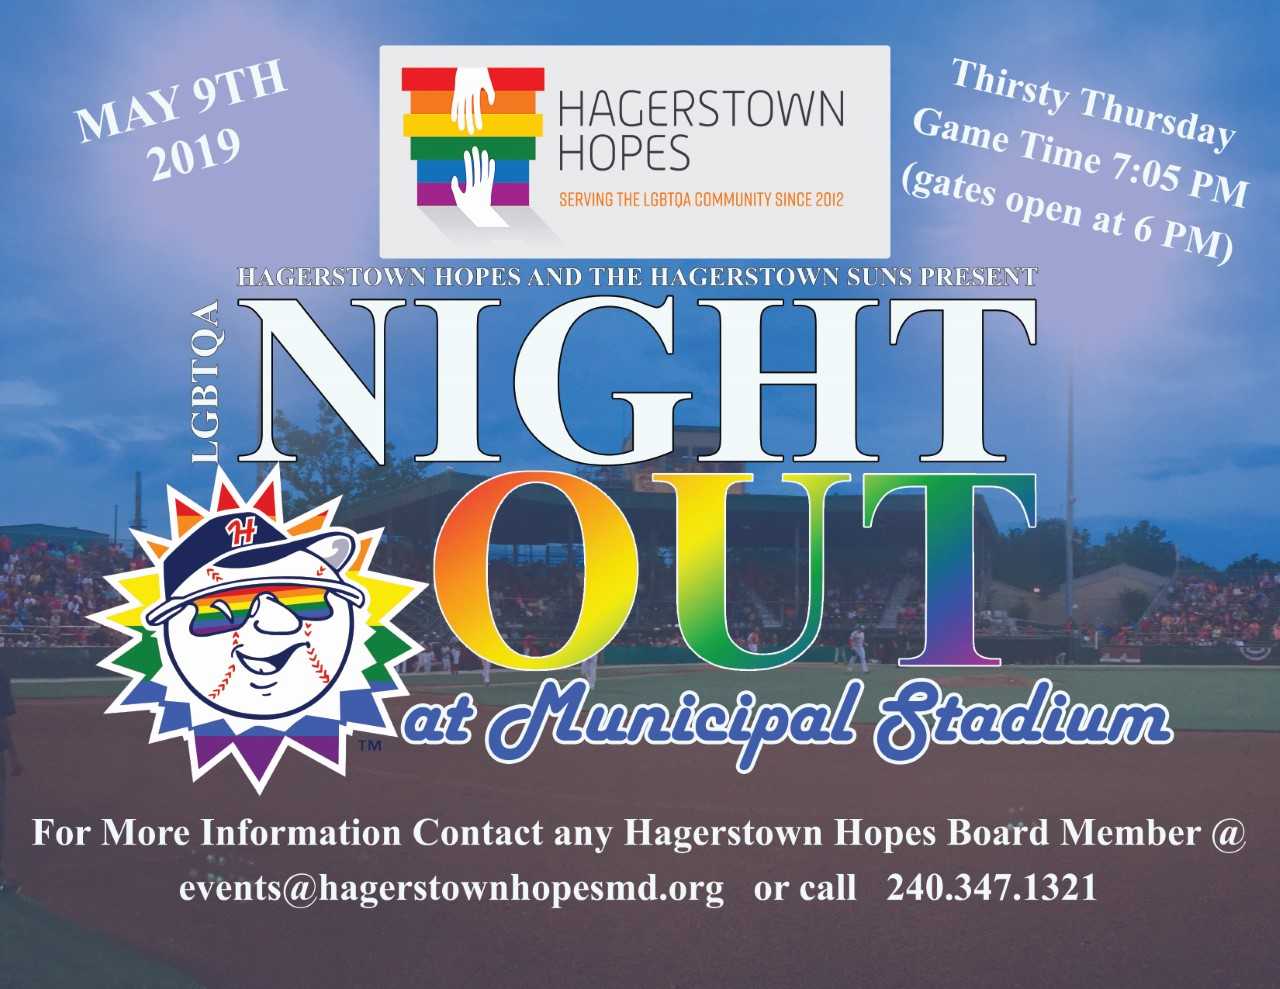 Pride Night Out @ Hagerstown Suns Memorial Stadium - Hagerstown Hopes